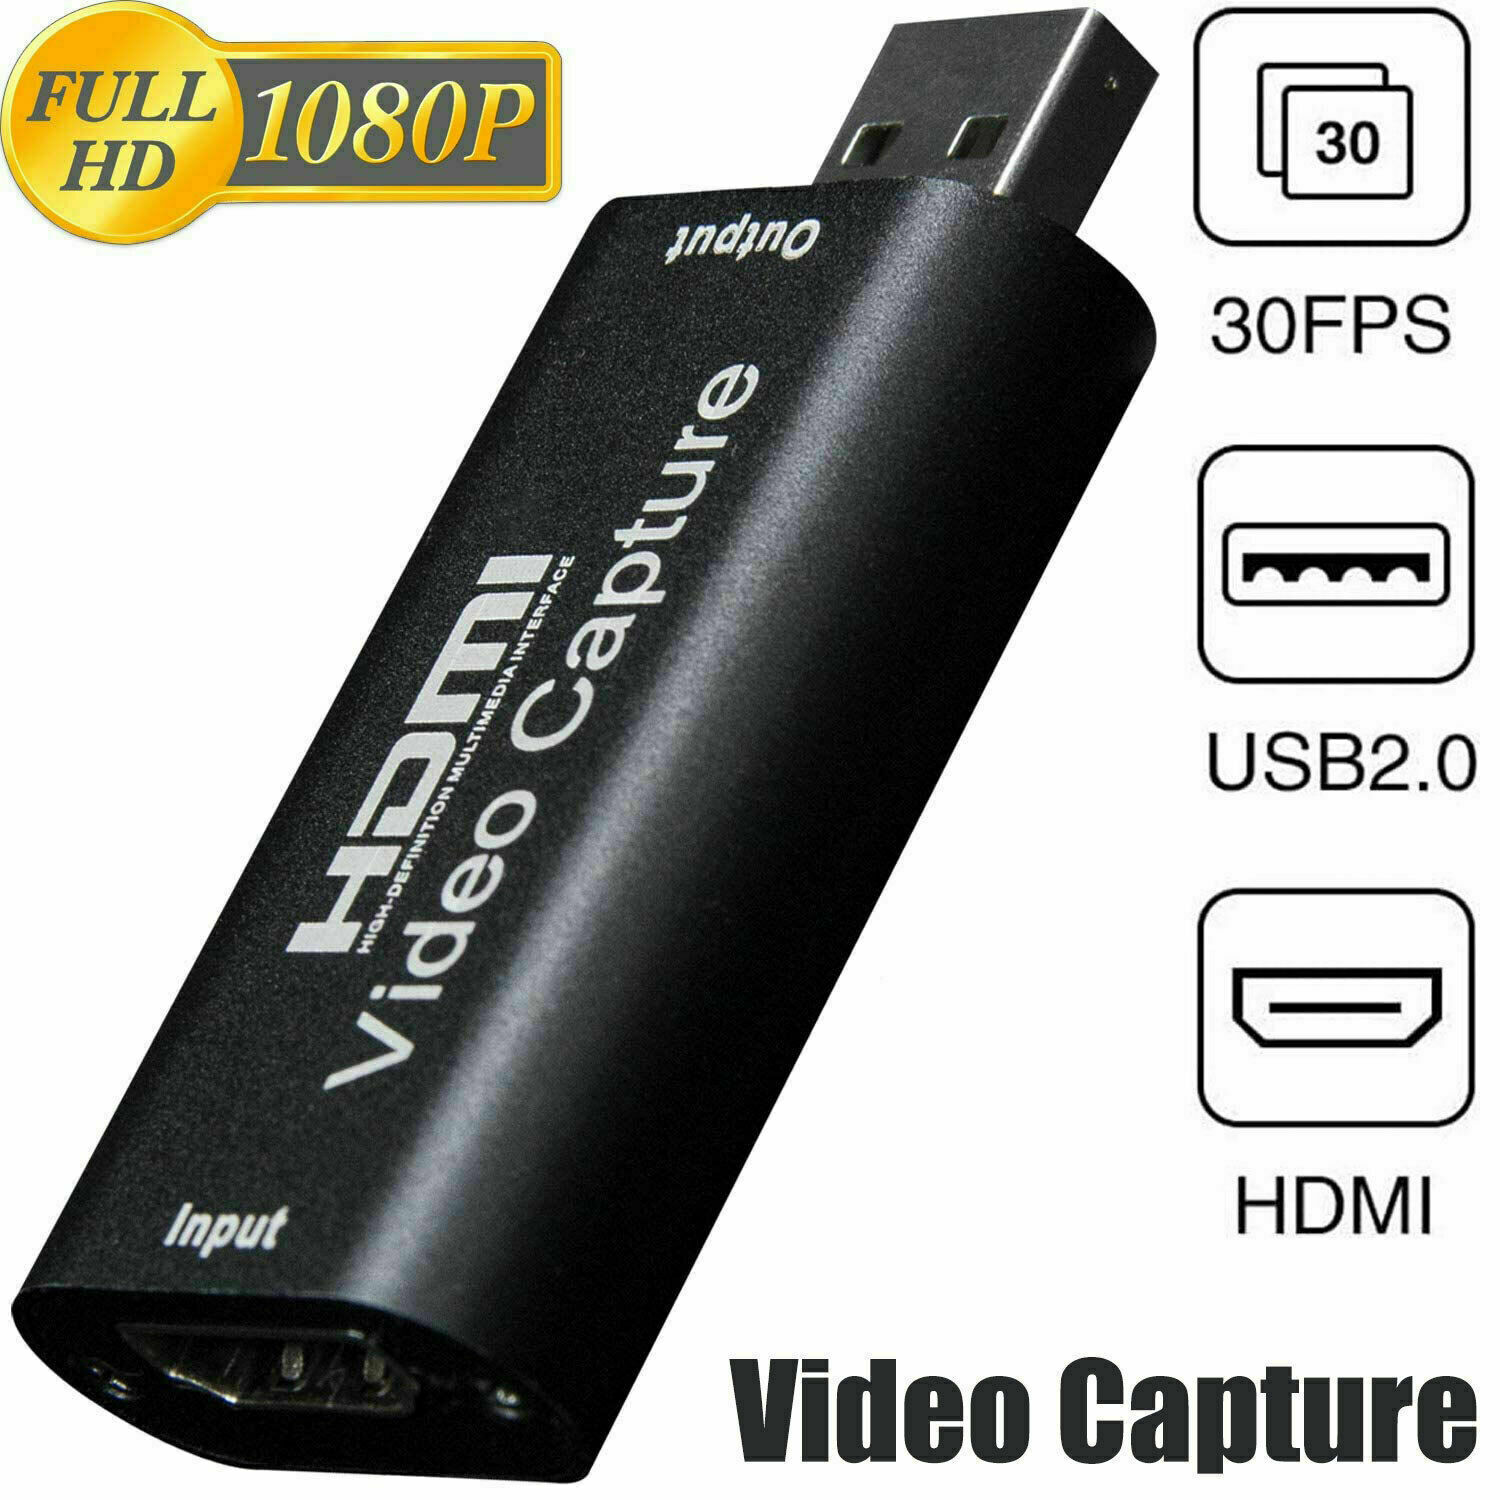 1080P 4K HDMI to USB 2.0 3.0 Video Capture Card Game Audio Video Live Streaming